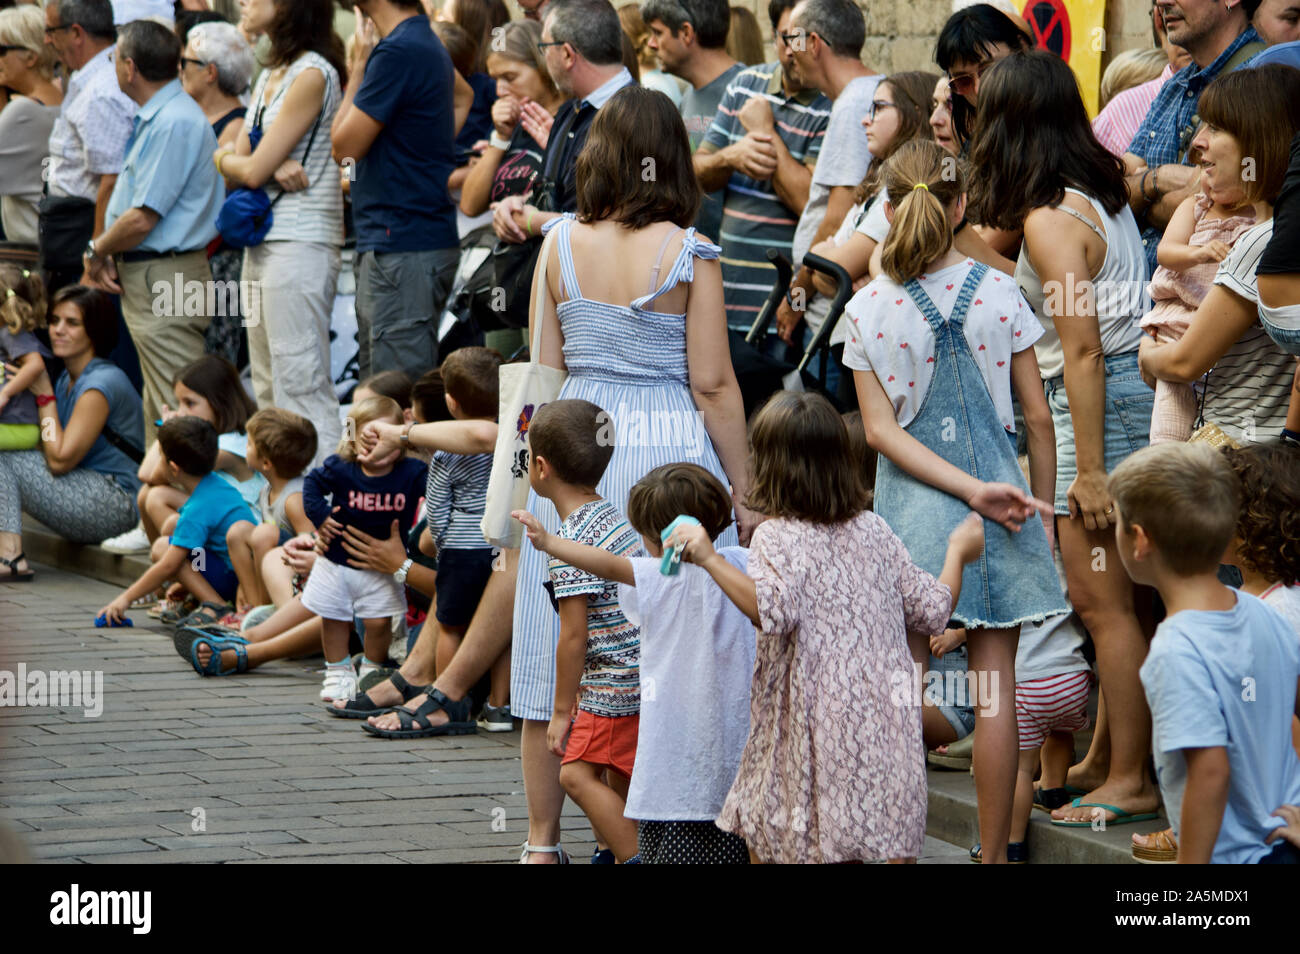 Kids watching the Giants Parade during La Merce Festival 2019 at Placa de Sant Jaume in Barcelona, Spain Stock Photo